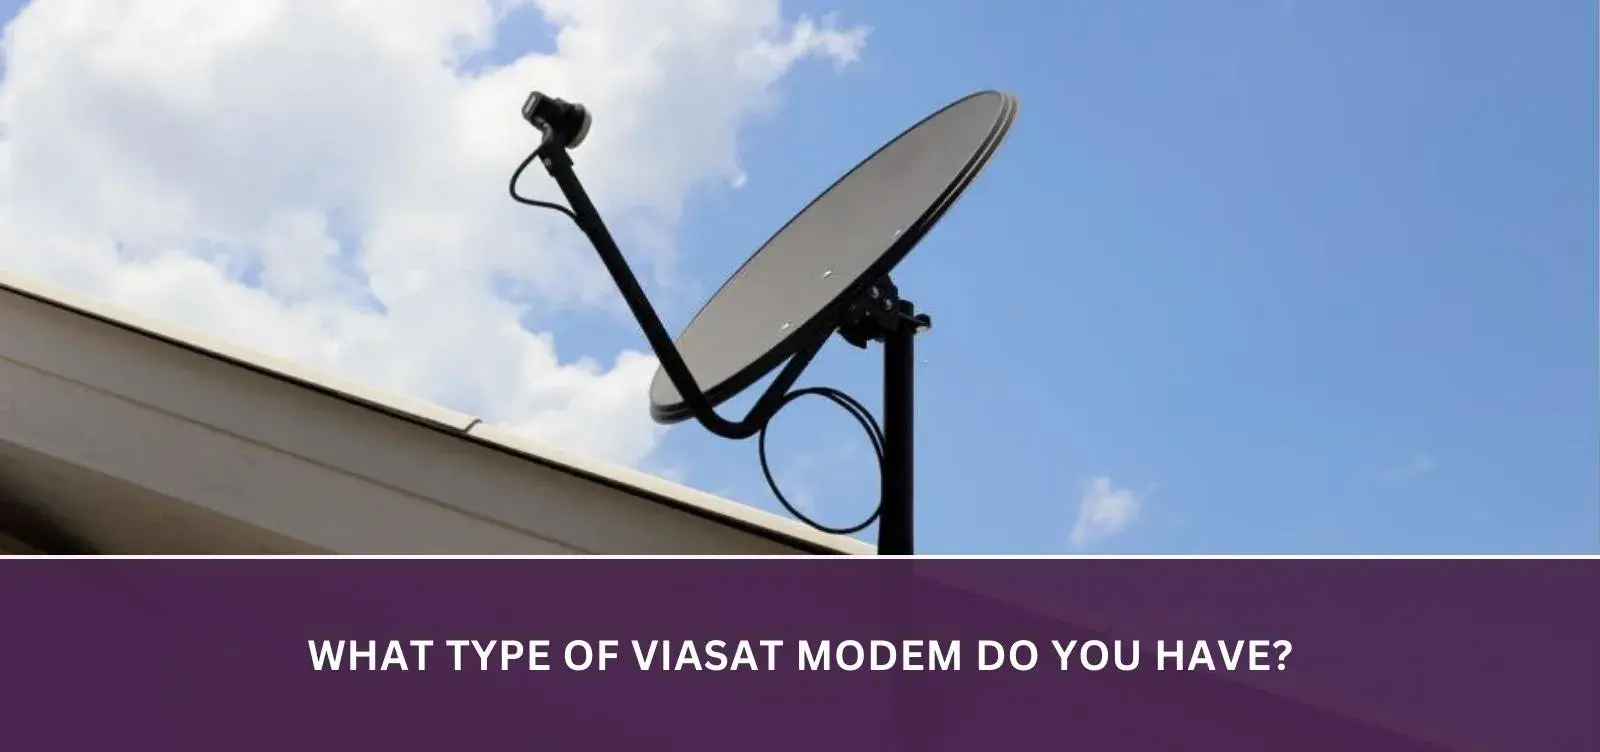 What Type of Viasat Modem Do You Have?